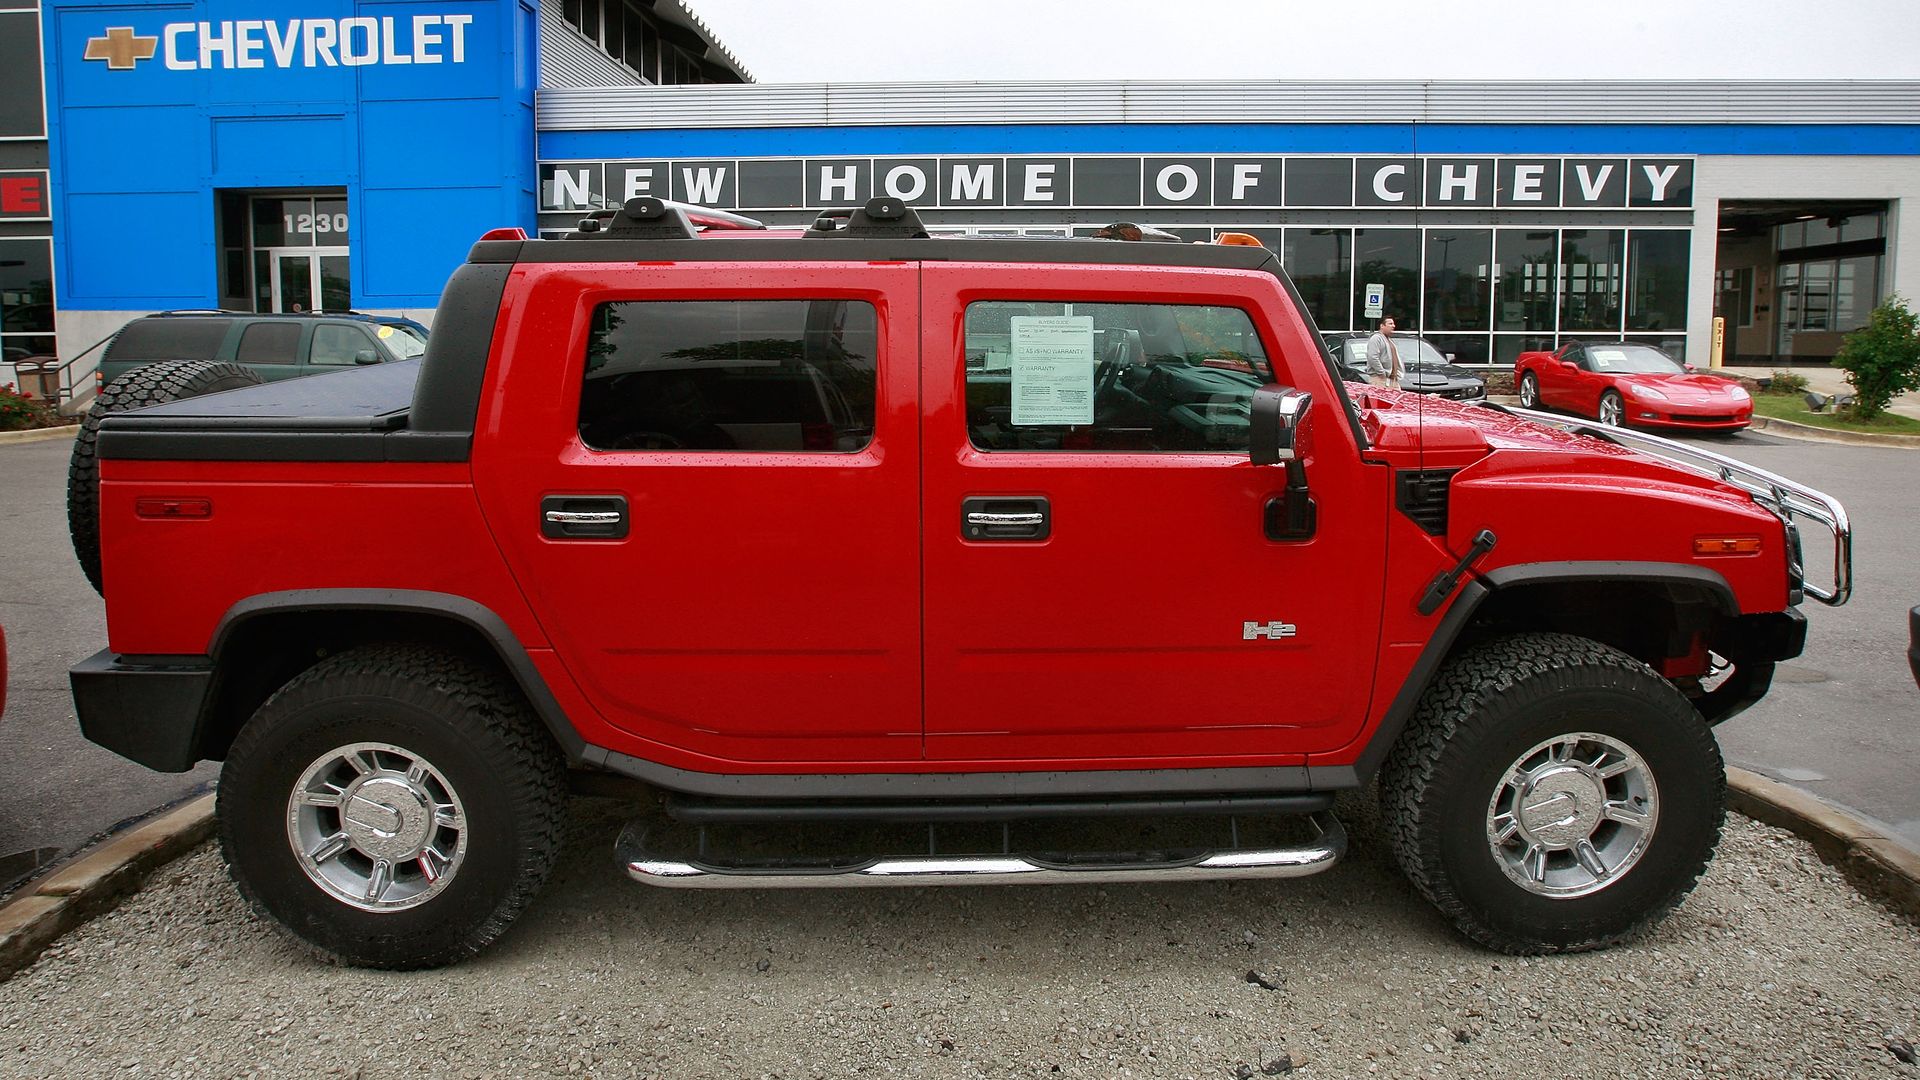 GM to bring Hummer back as an electric vehicle - Axios